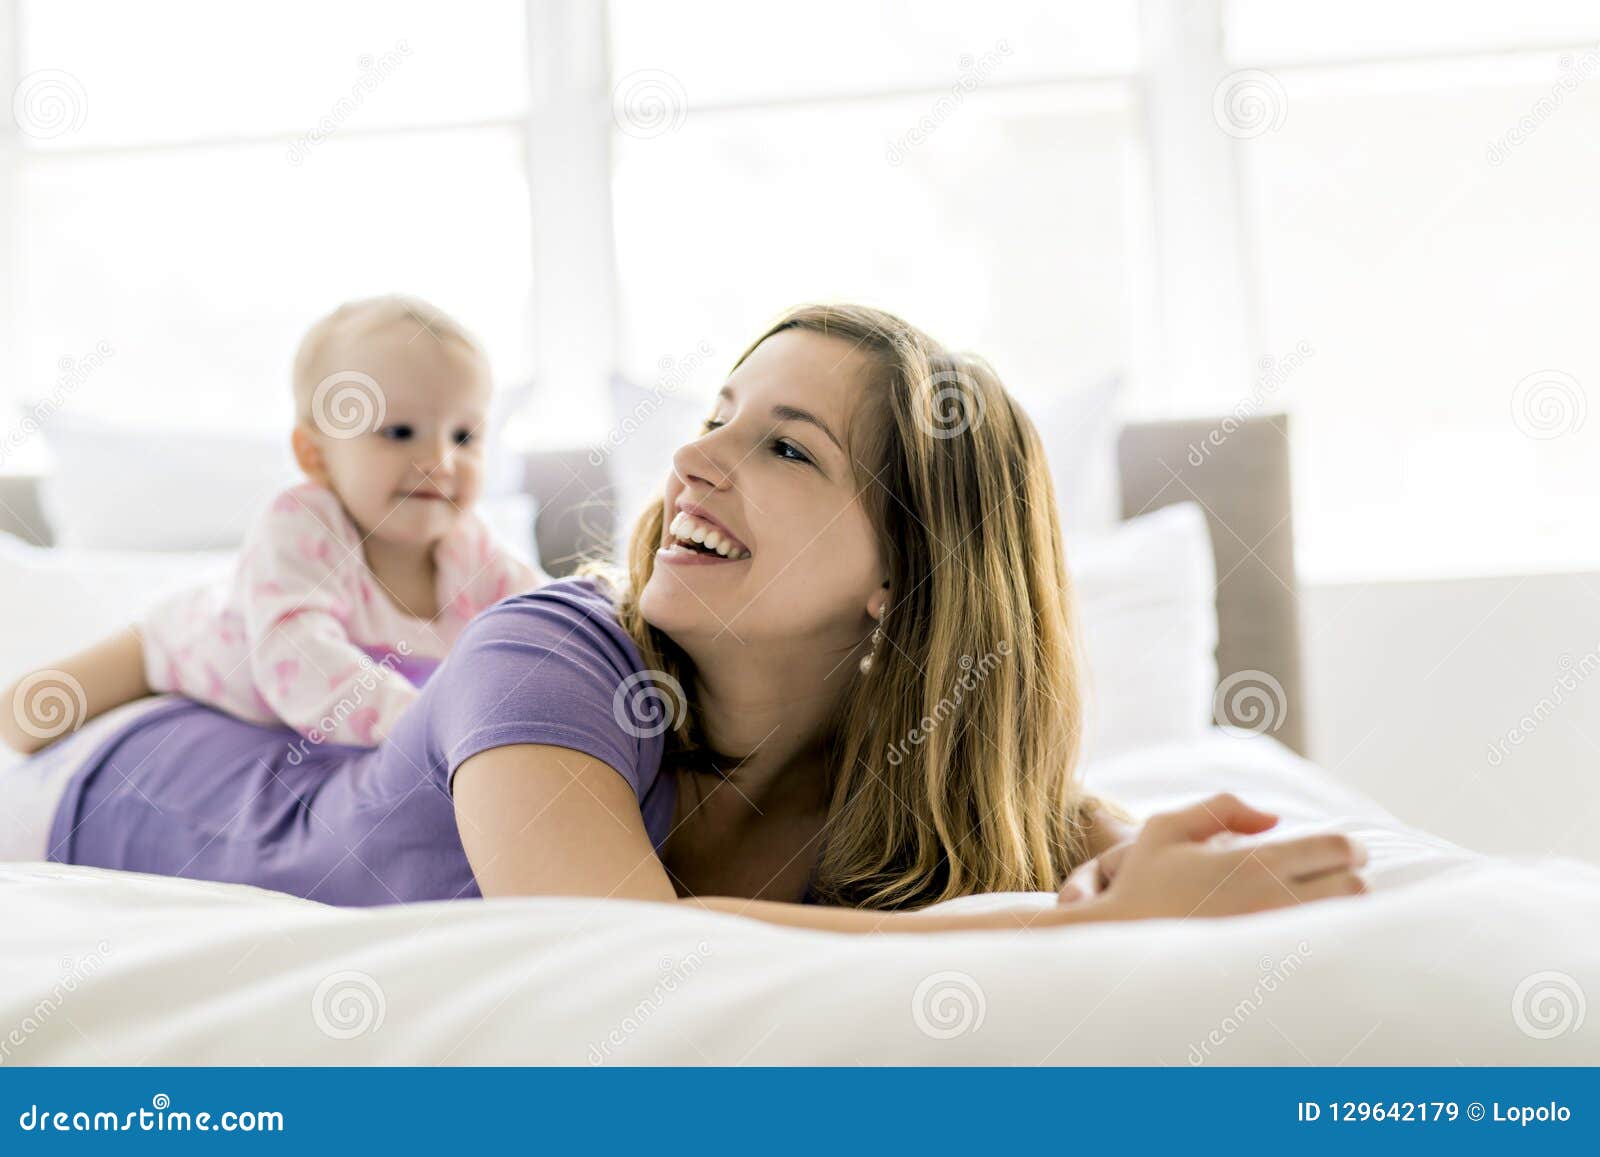 Happy Mother with Baby Lying on Bed at Home Stock Image - Image of ...